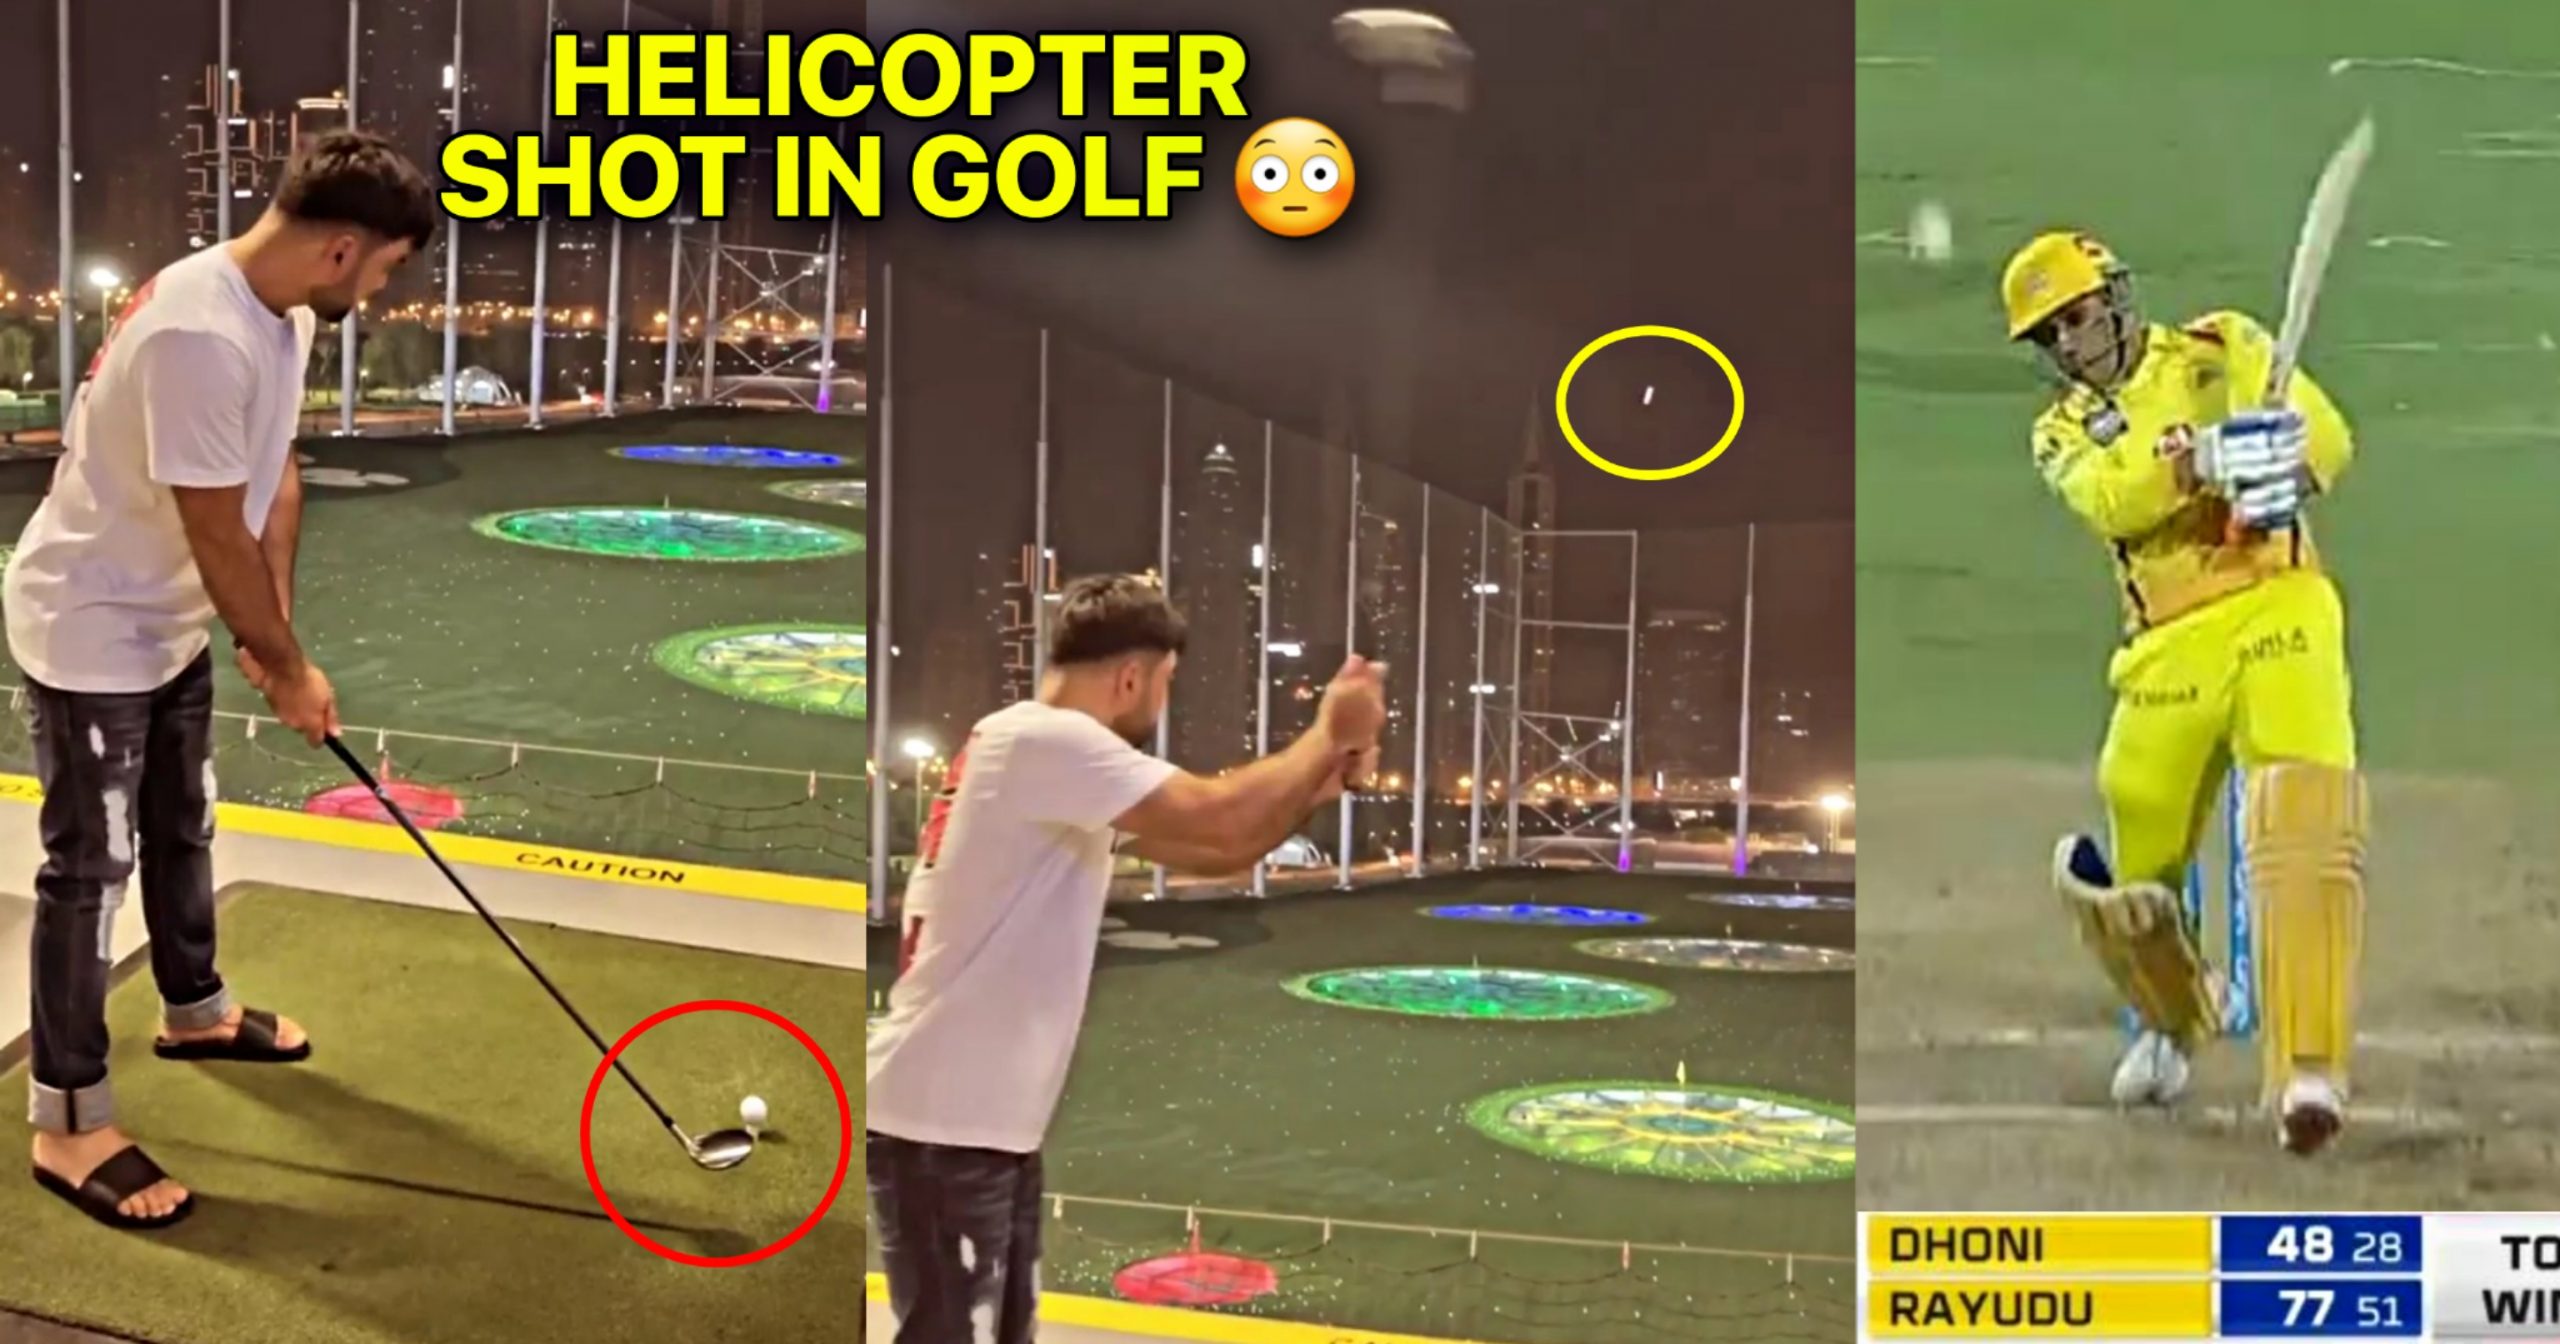 Watch : Rashid Khan plays a helicopter shot like Dhoni while playing Golf  in a funny video - Sports Edge